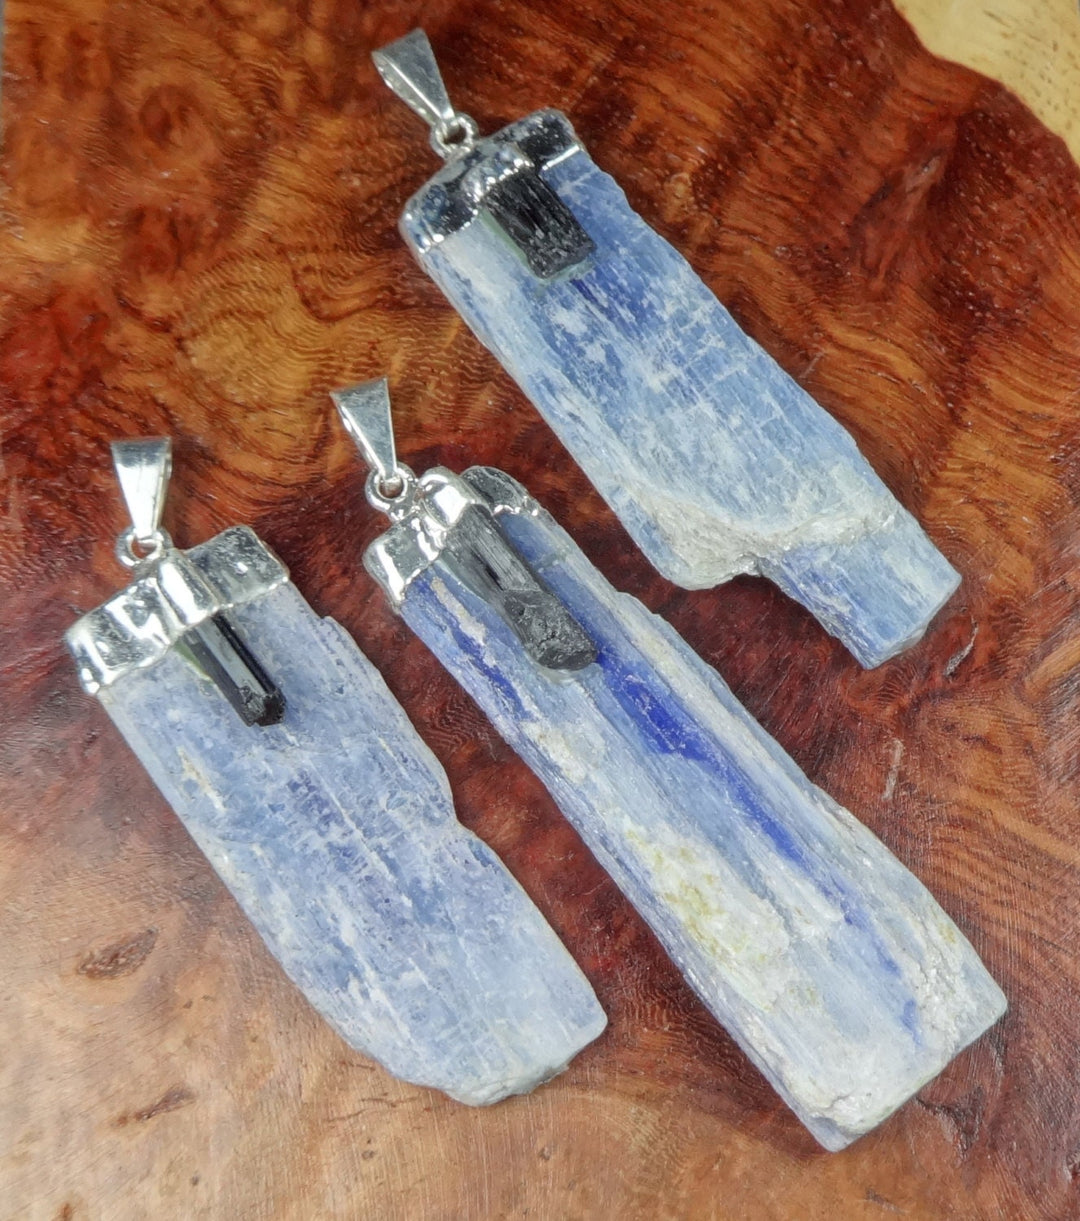 Kyanite And Tourmaline Crystal Pendant Silver Plated Necklace Charm Healing Crystals And Stones